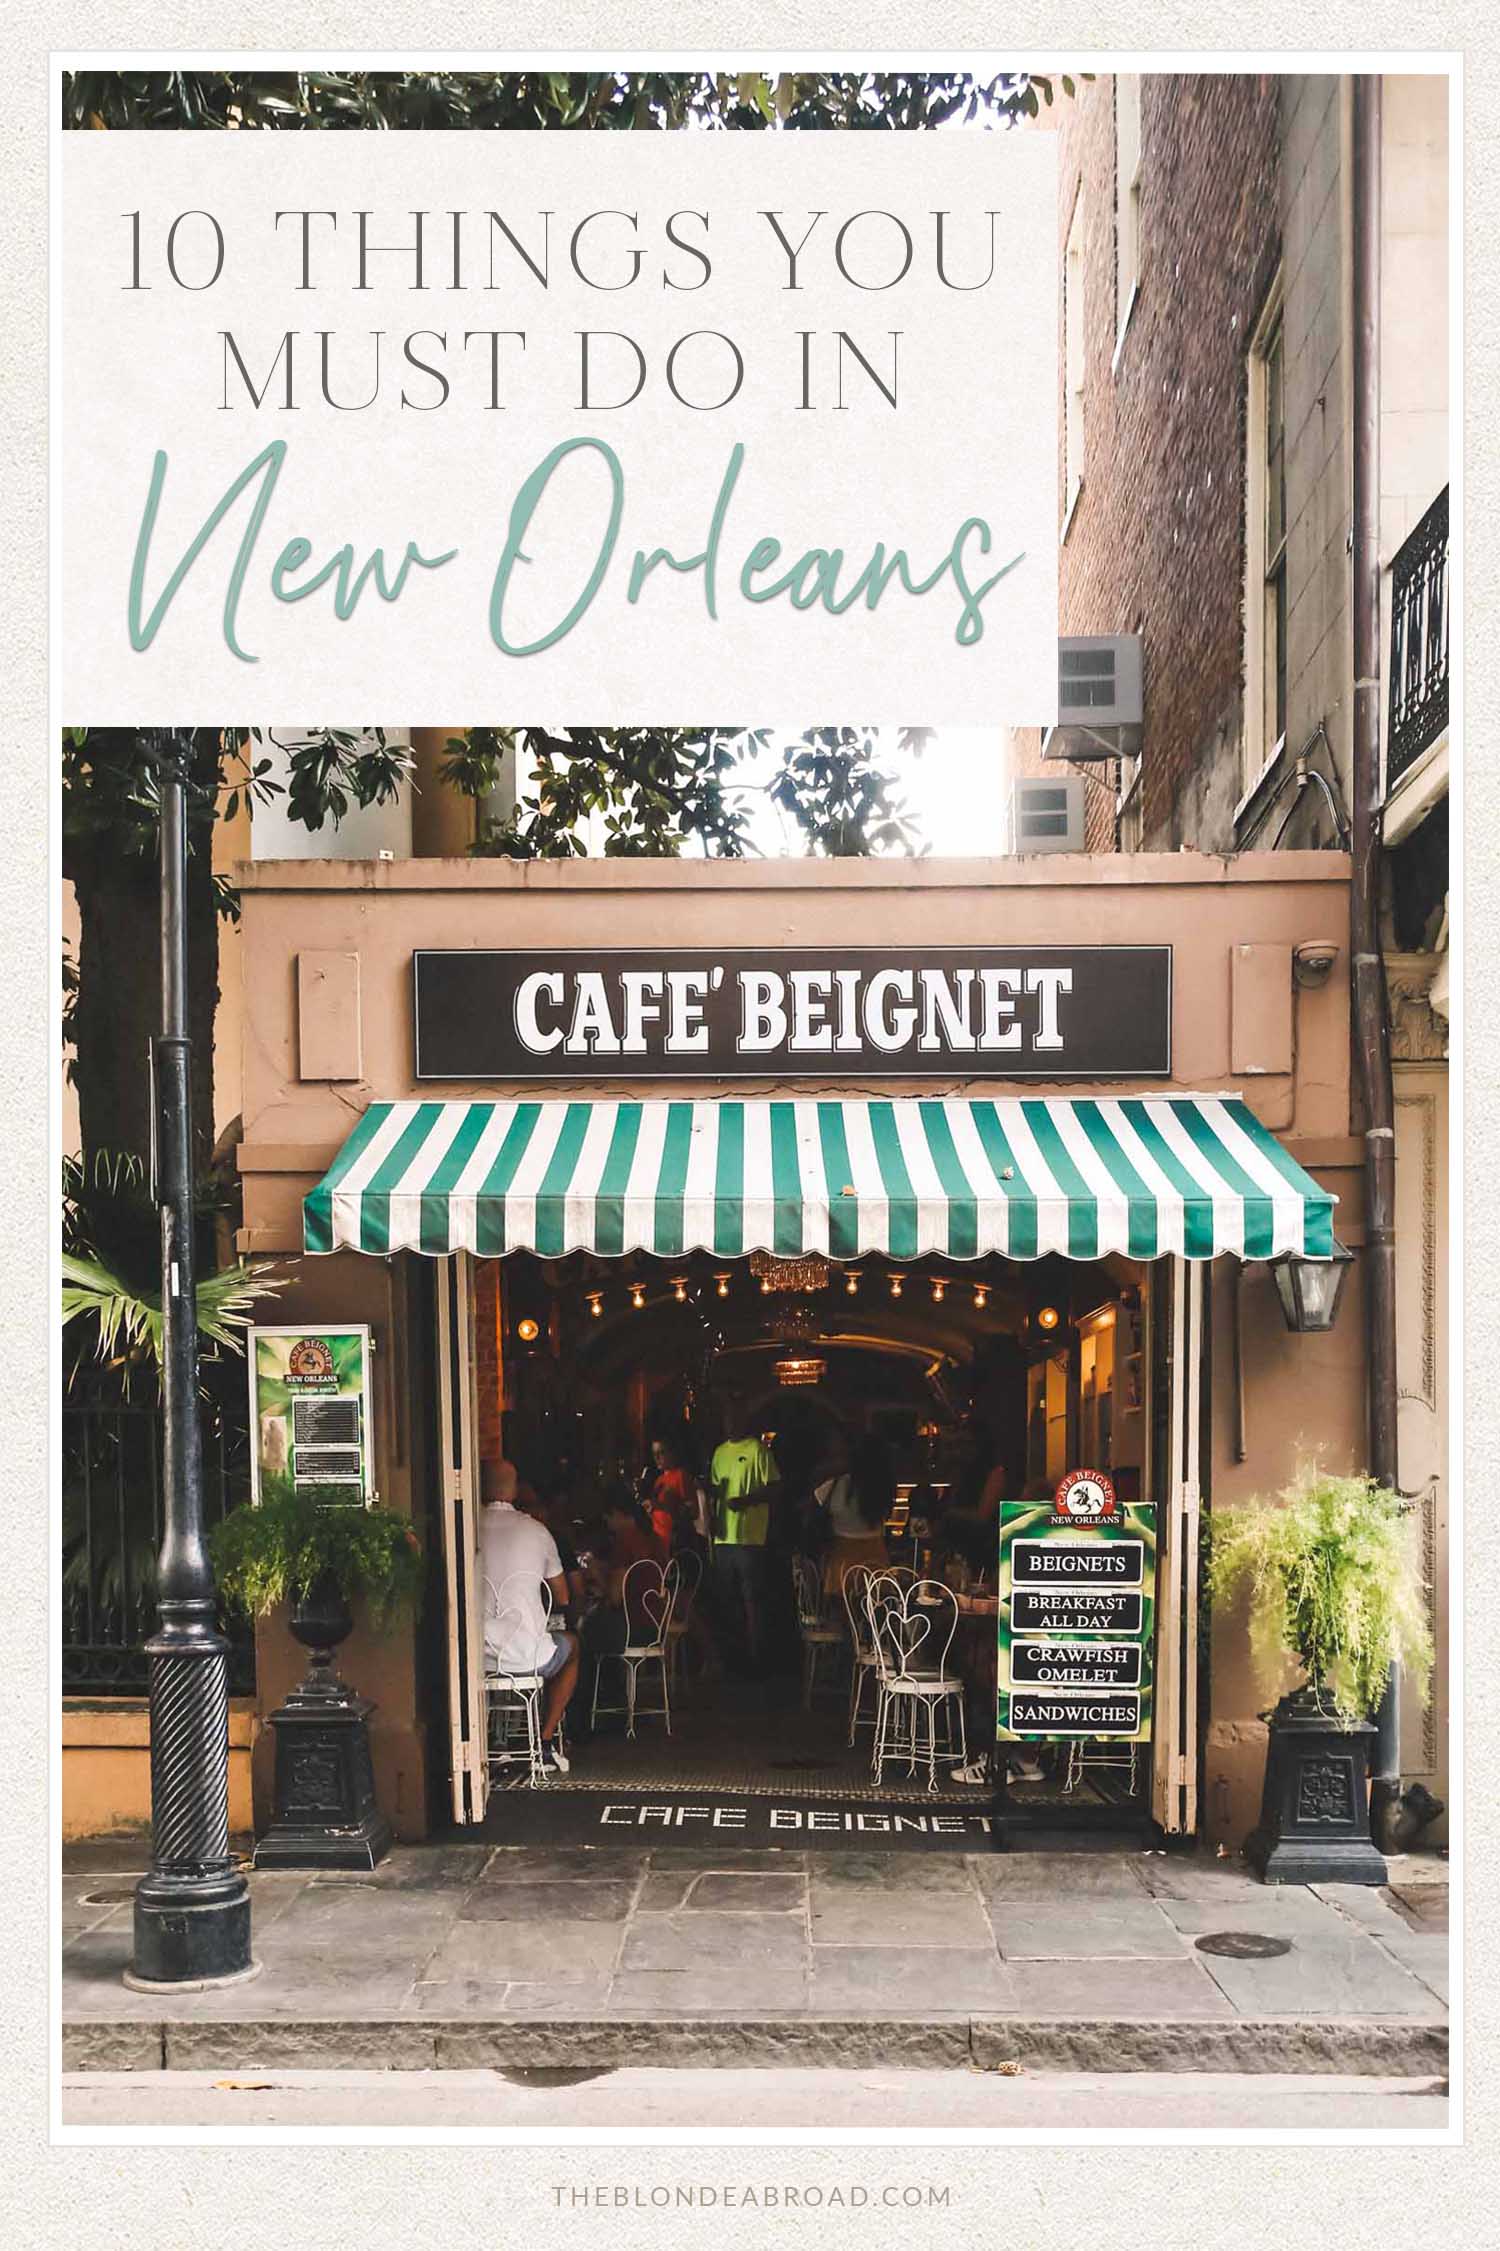 10 Things You Must do in Nola